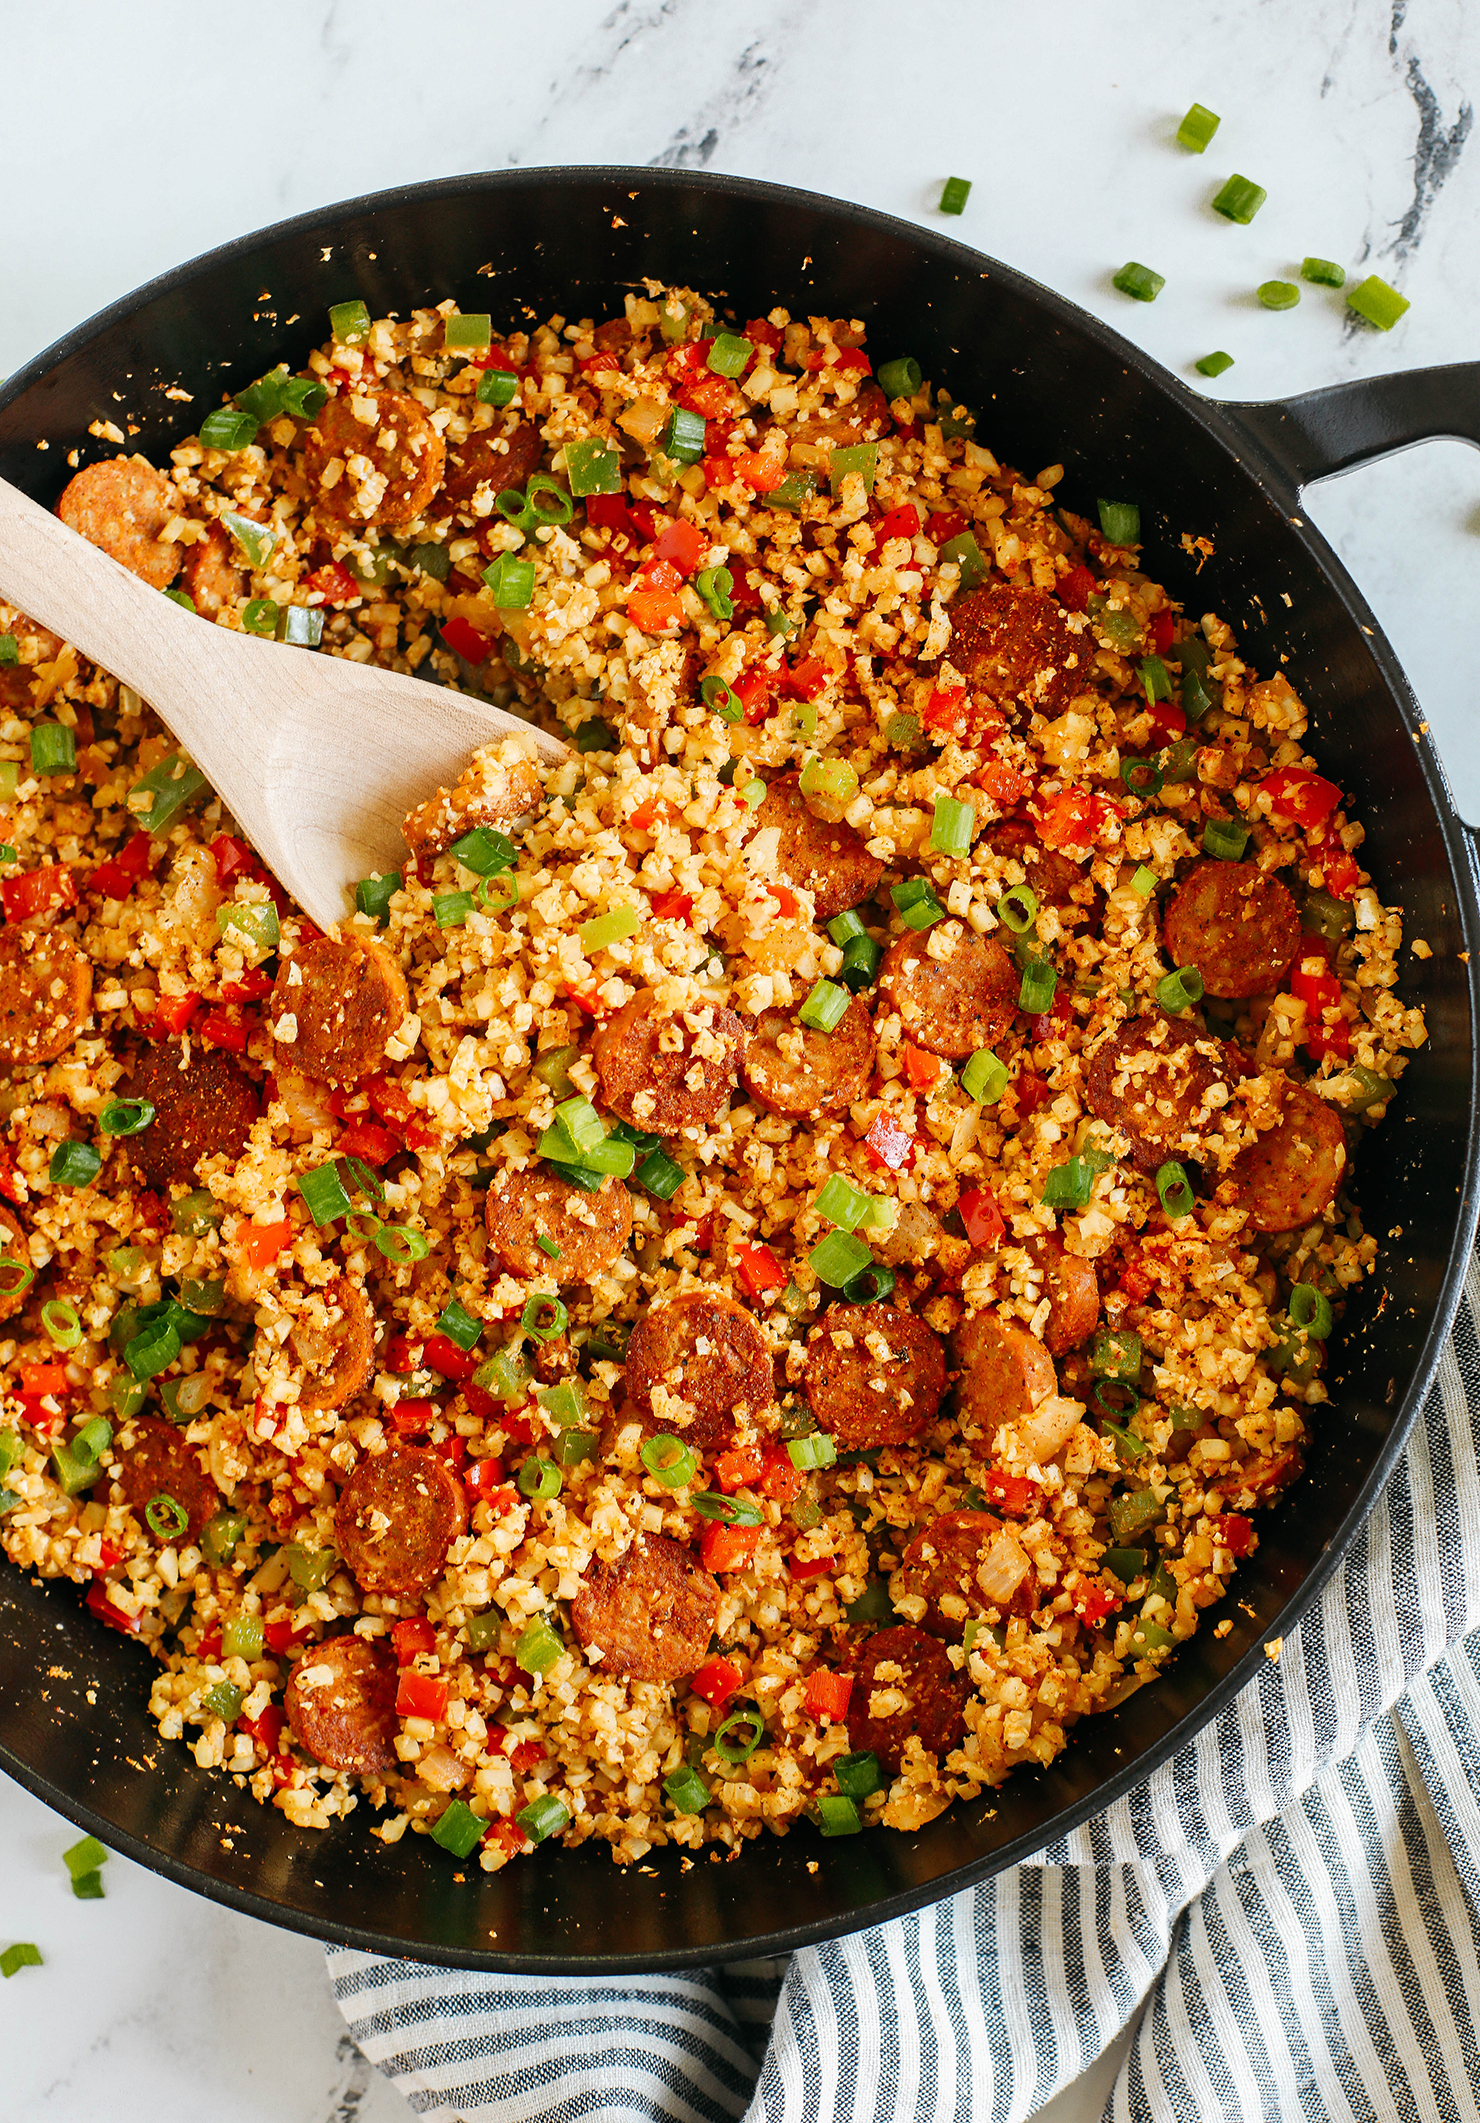 This Cajun Sausage and Cauliflower Rice Skillet is loaded with peppers, onions, andouille chicken sausage and tender riced cauliflower seasoned to perfection with our homemade Cajun seasoning!  The perfect low carb dinner for your family!